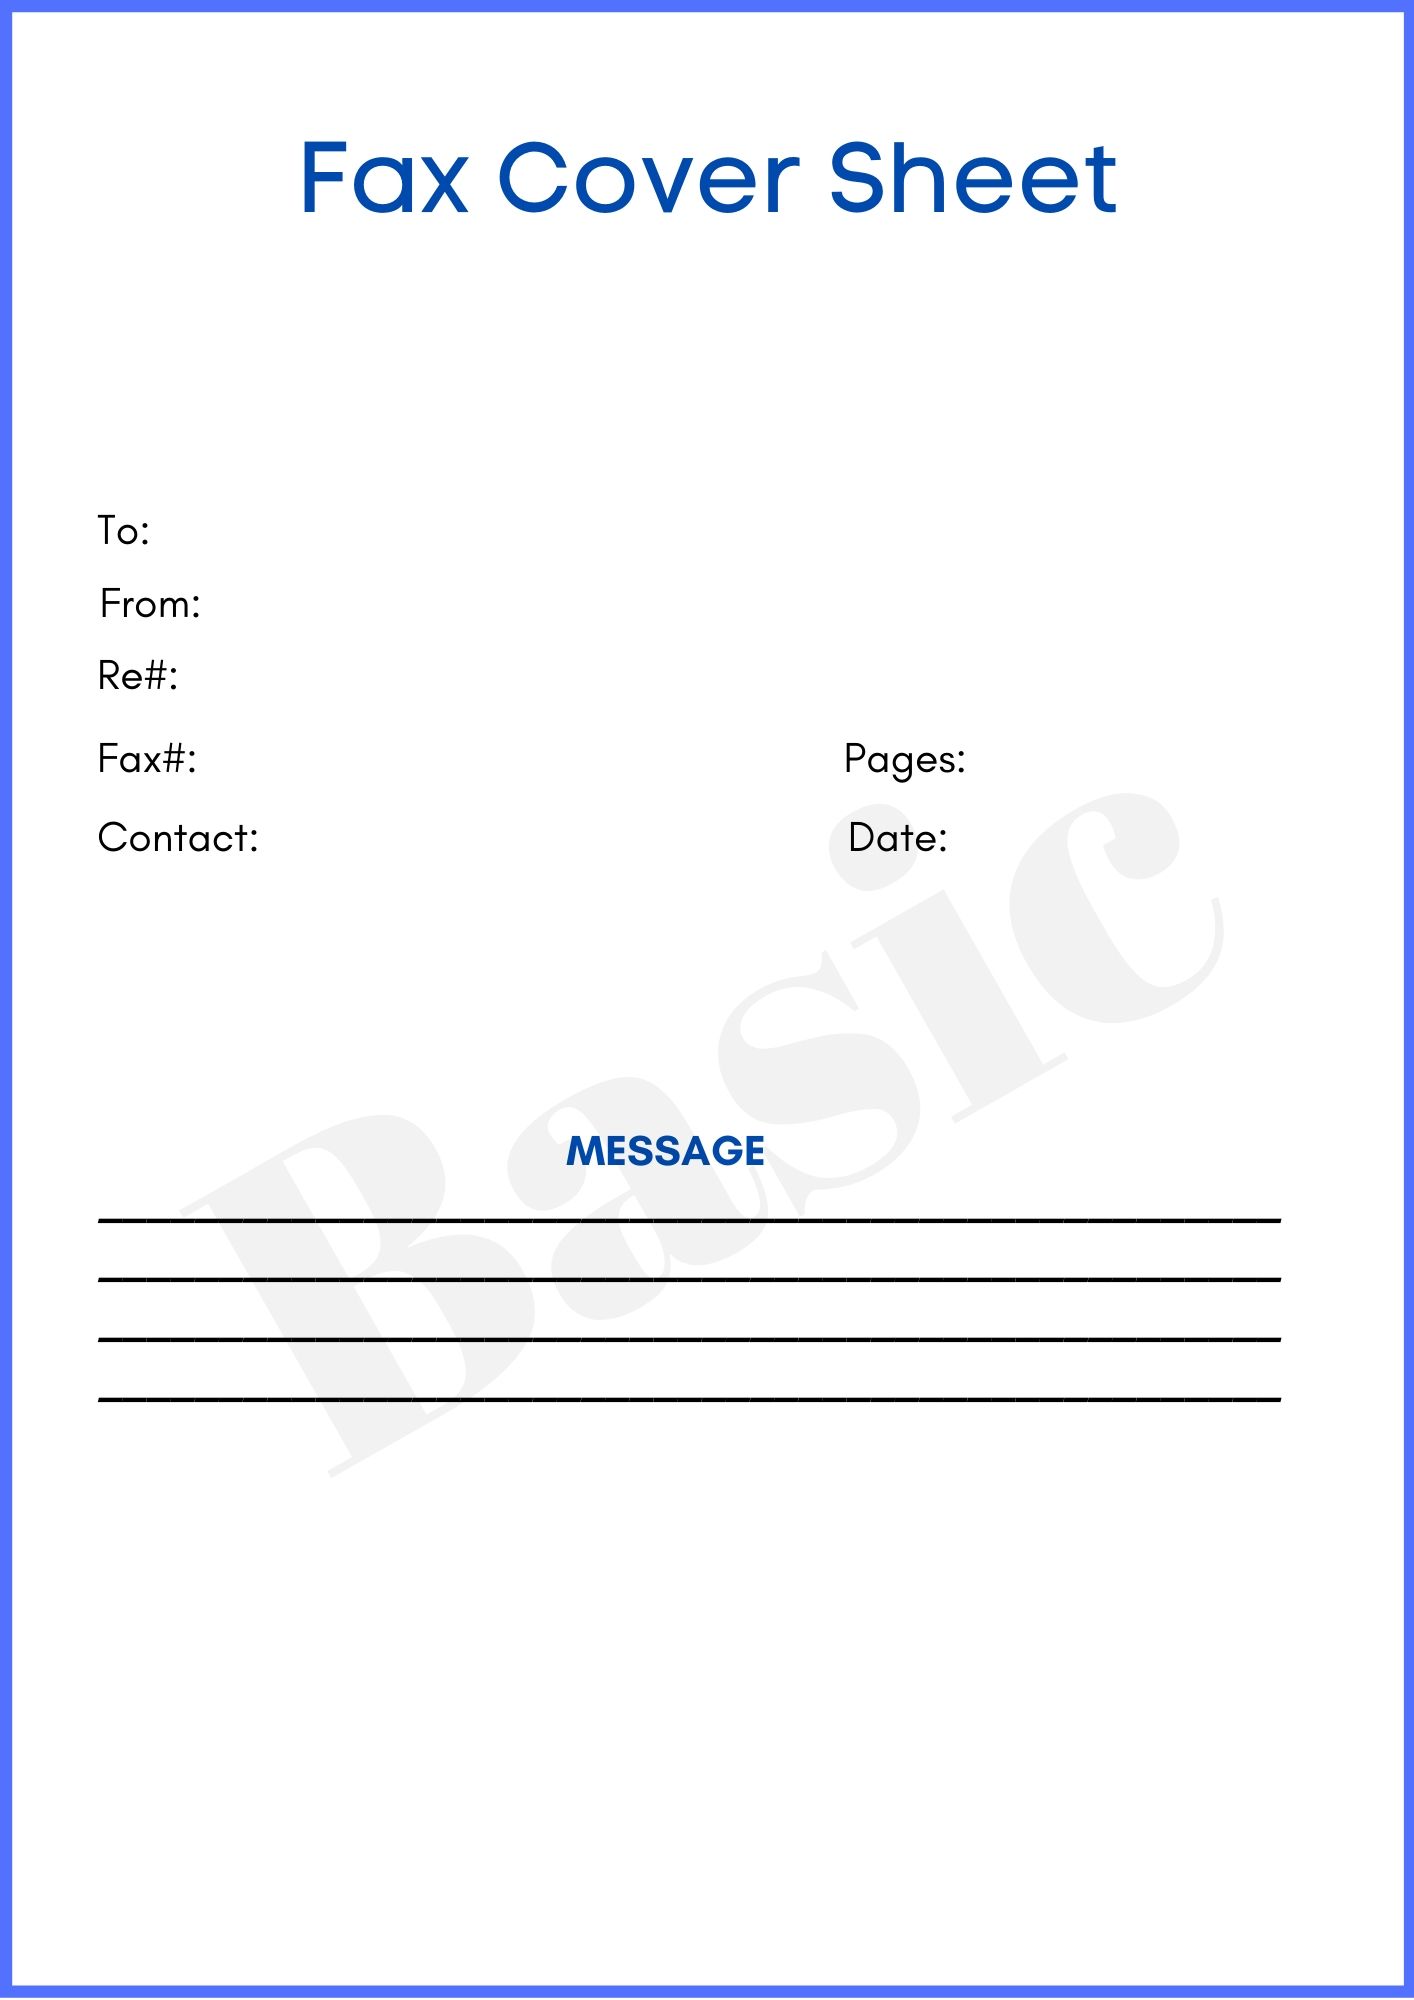 basic-fax-cover-sheet-template-free-printable-in-pdf